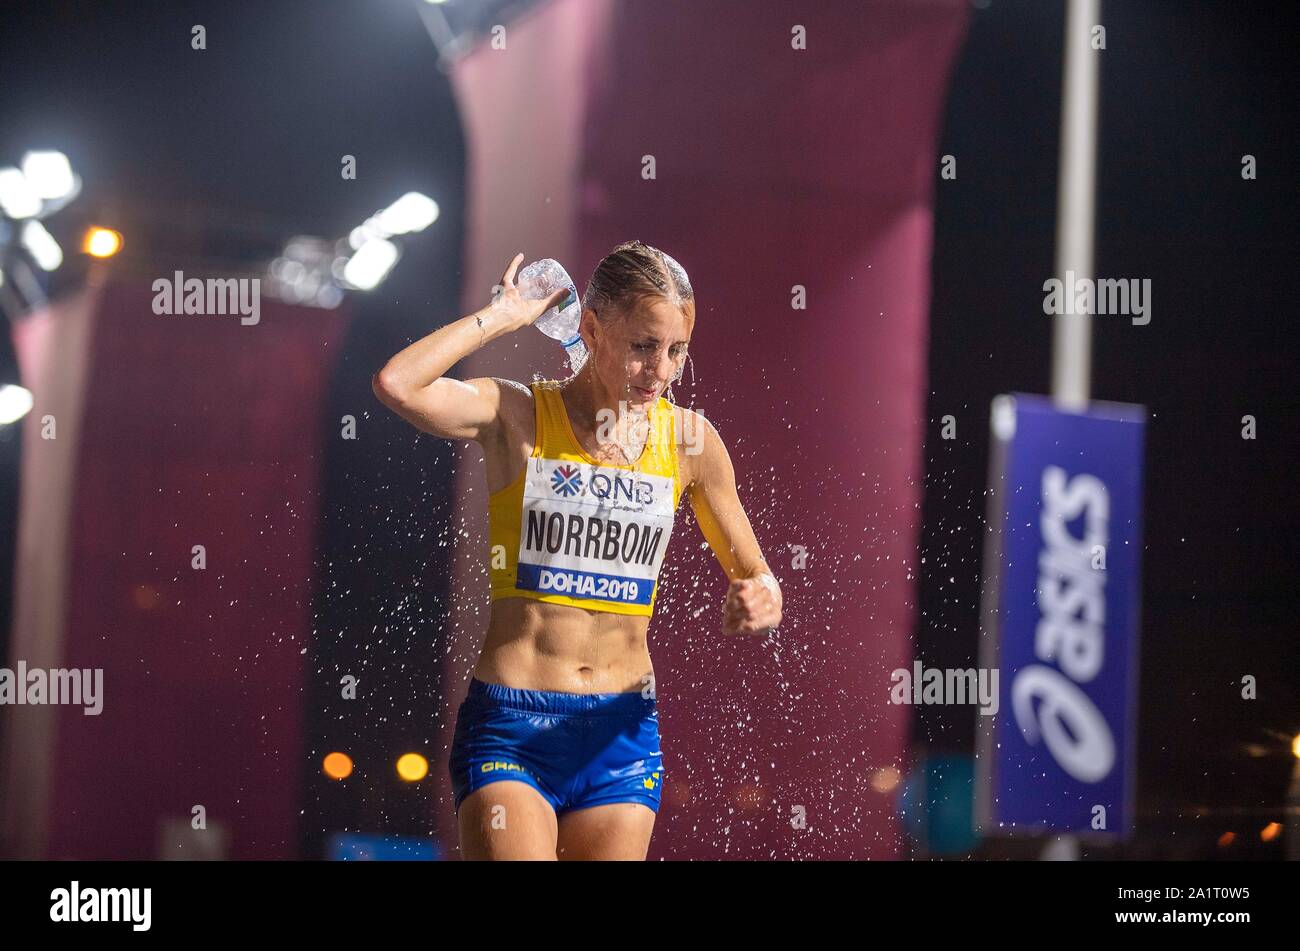 Refreshment for Cecilia NORRBOM (SWE/DNF), overshadowed with water Women's Final Marathon, on 27.09.2019 World Athletics Championships 2019 in Doha/Qatar, from 27.09. - 10.10.2019. | Usage worldwide Stock Photo